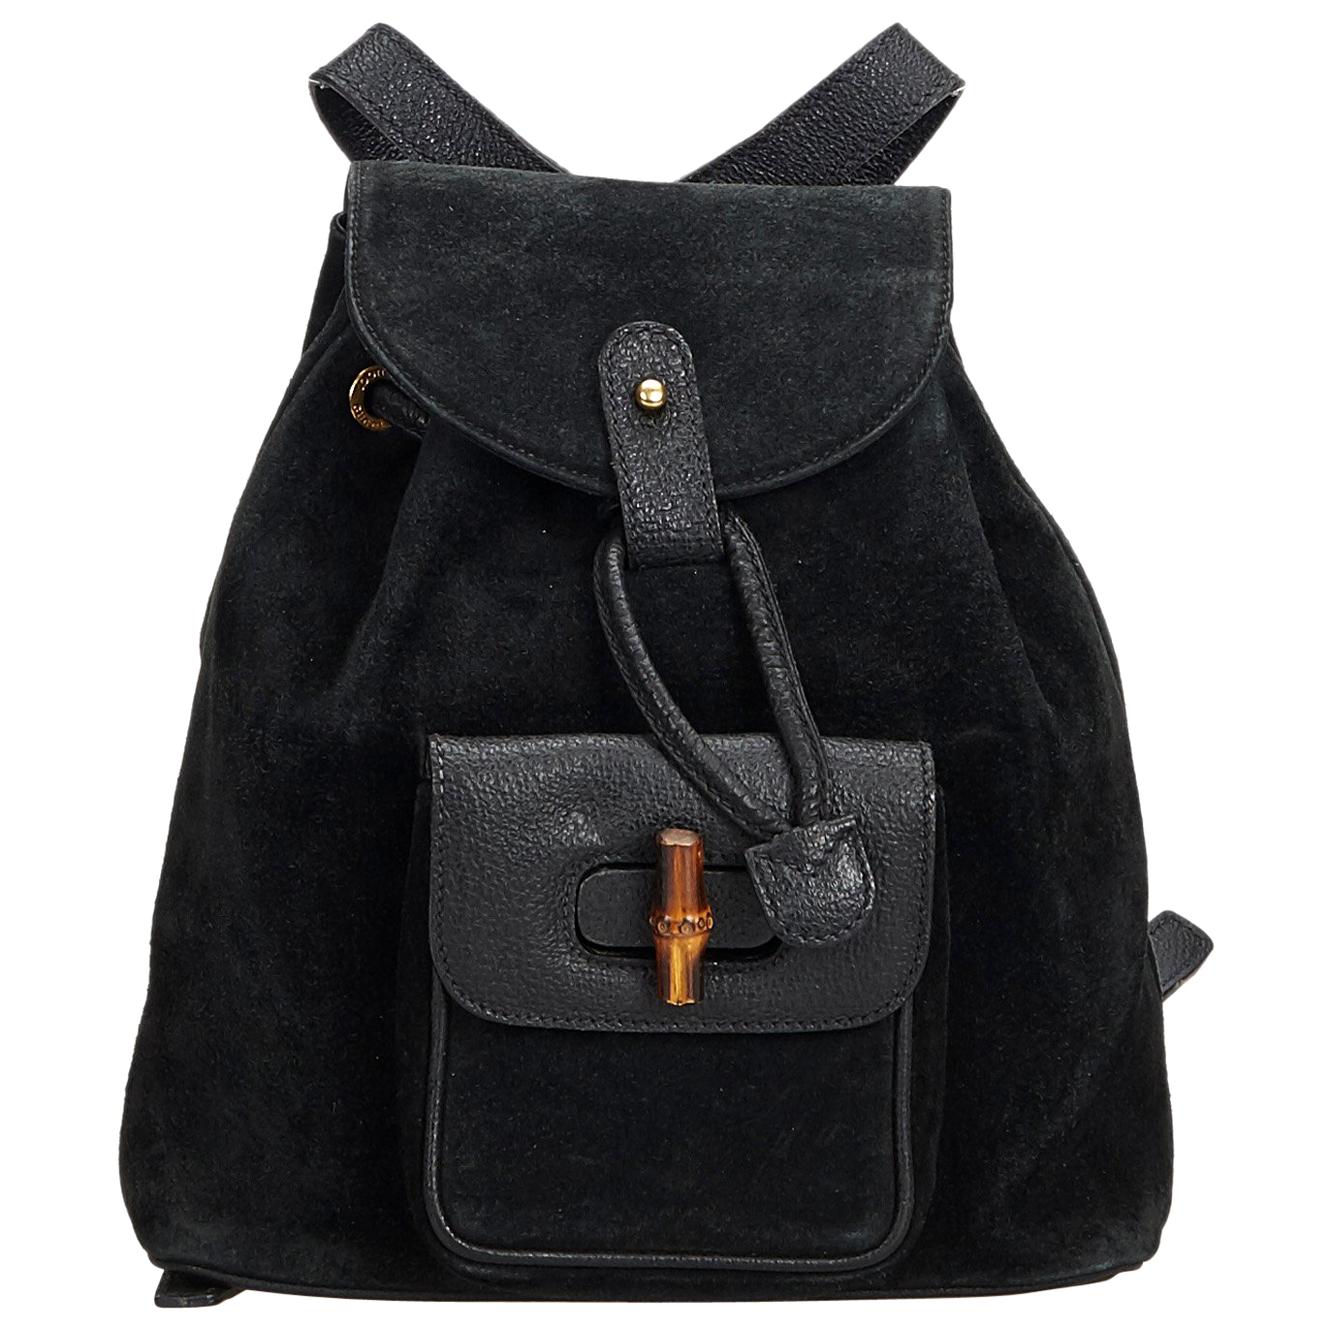 Gucci Black Suede Leather Bamboo Drawstring Backpack Italy